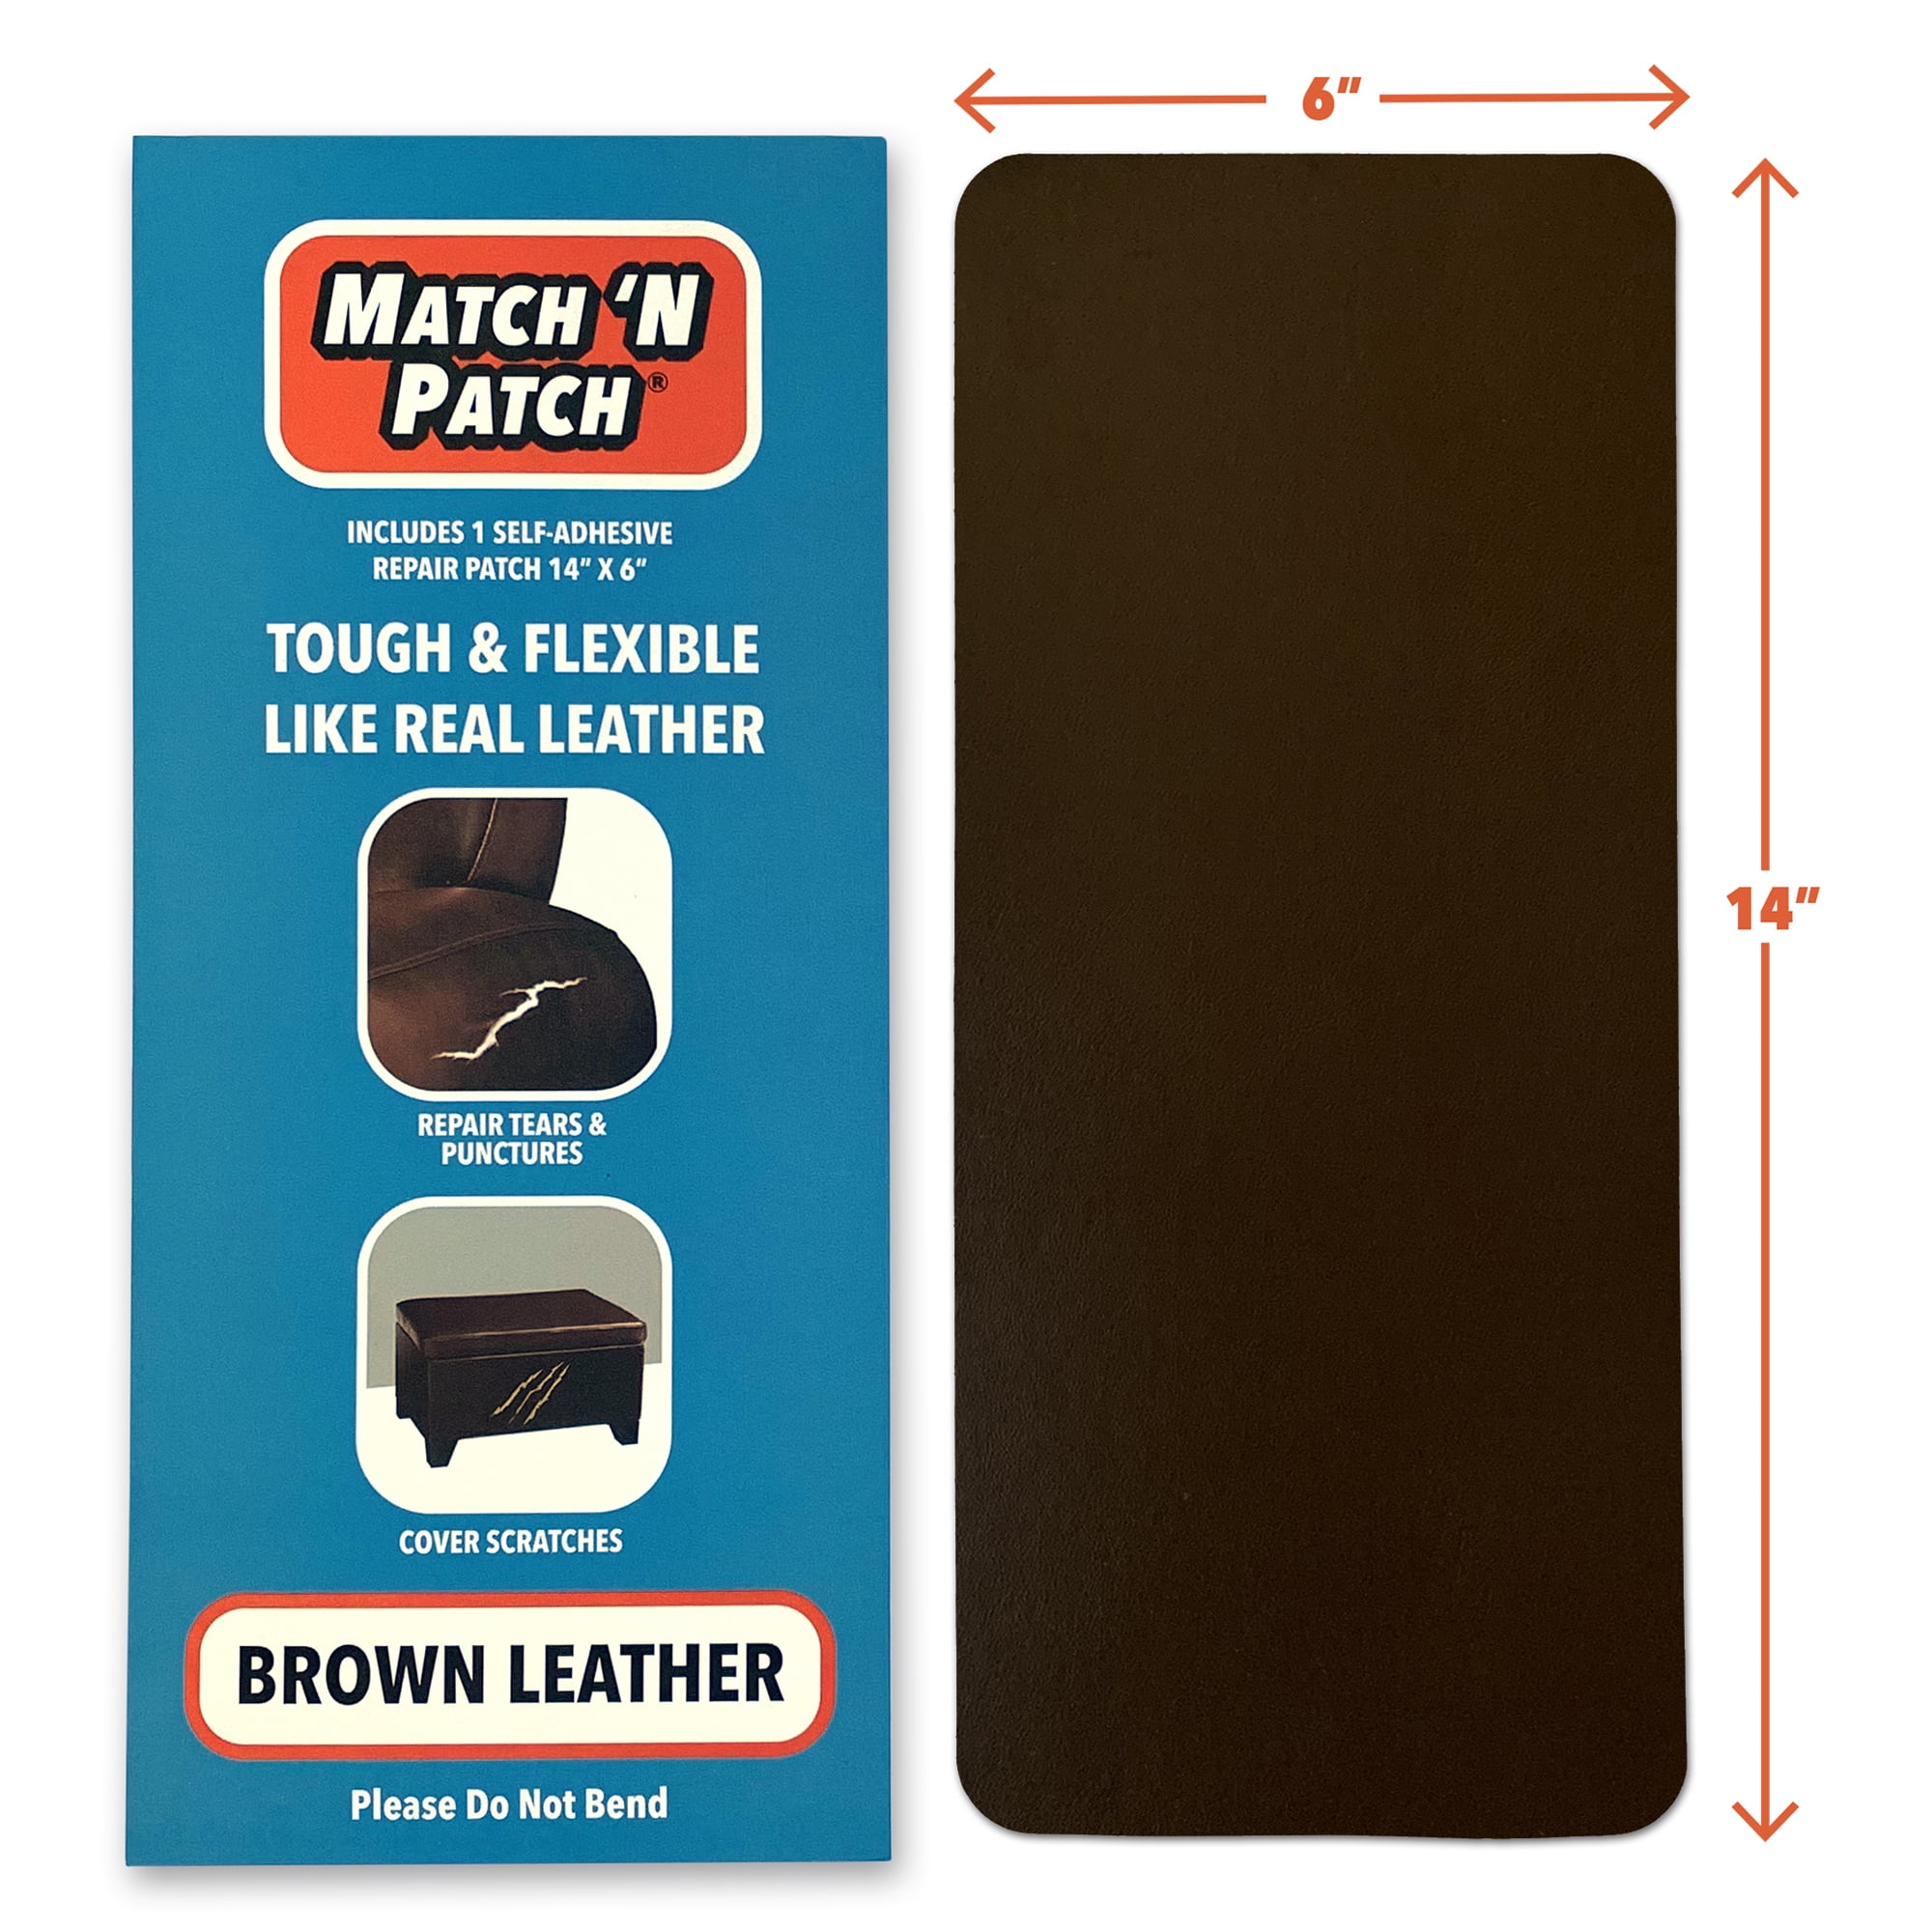 Match N Patch Realistic Brown Leather Repair Patch Walmart Com